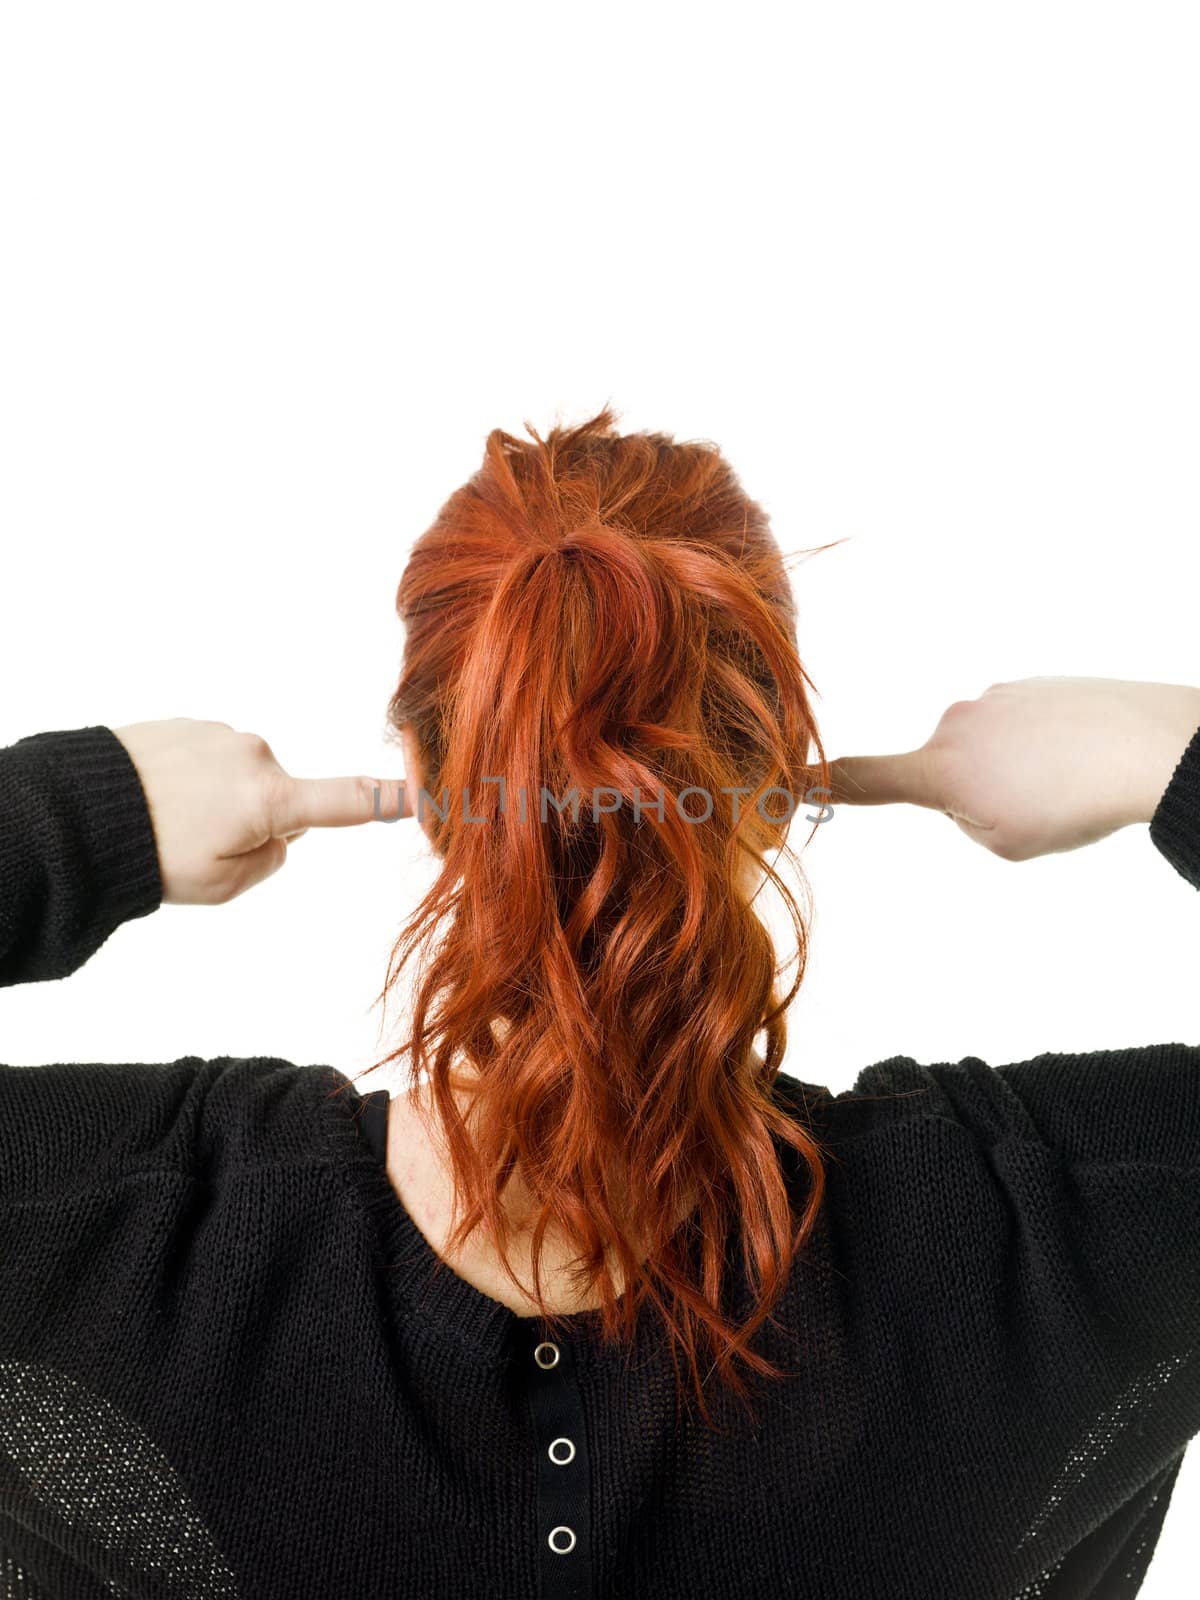 Back of a red haired woman by gemenacom